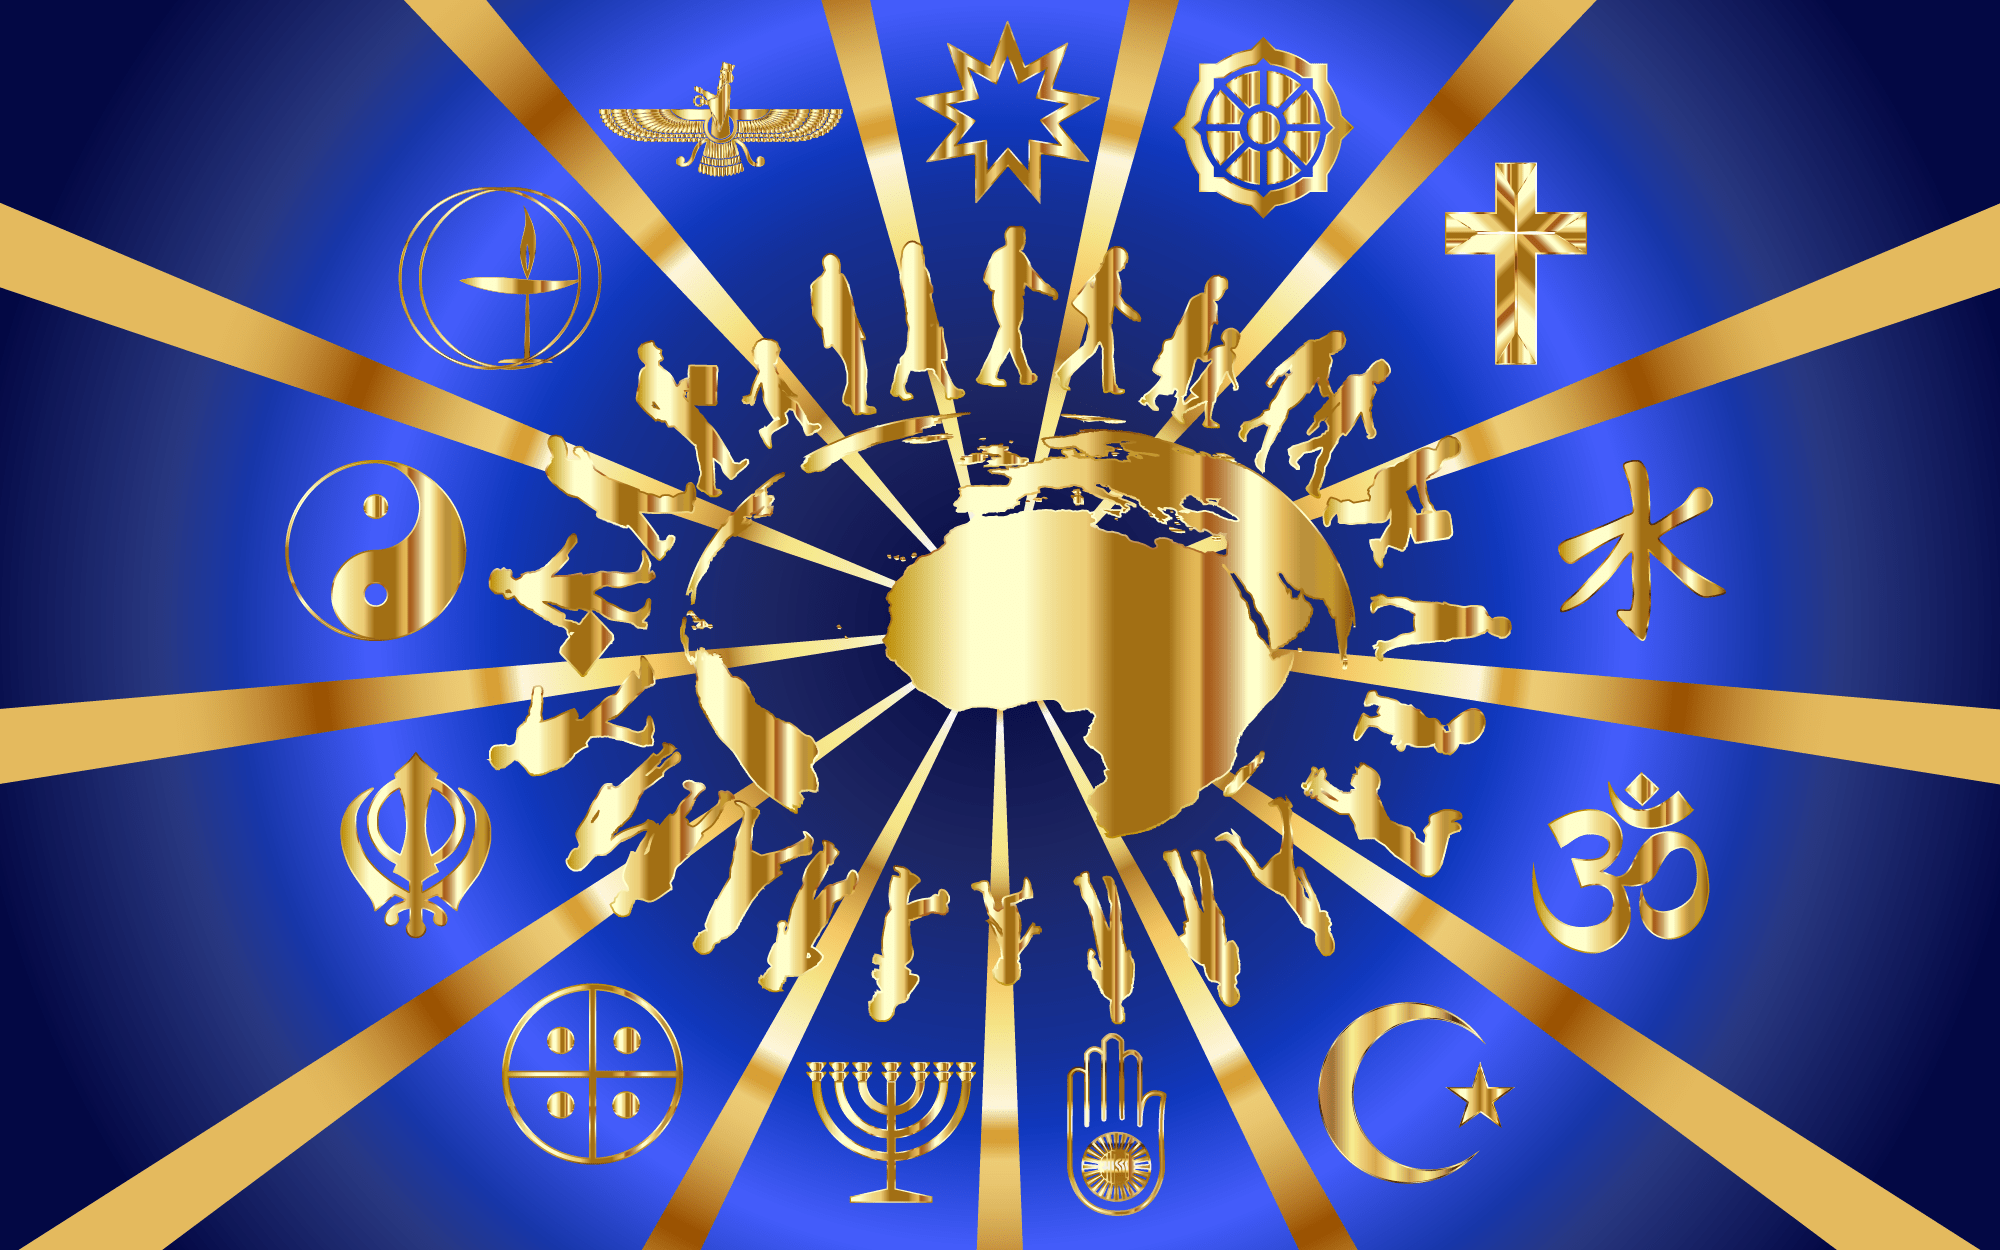 image of globe and its religious symbols with people around it connected by lines